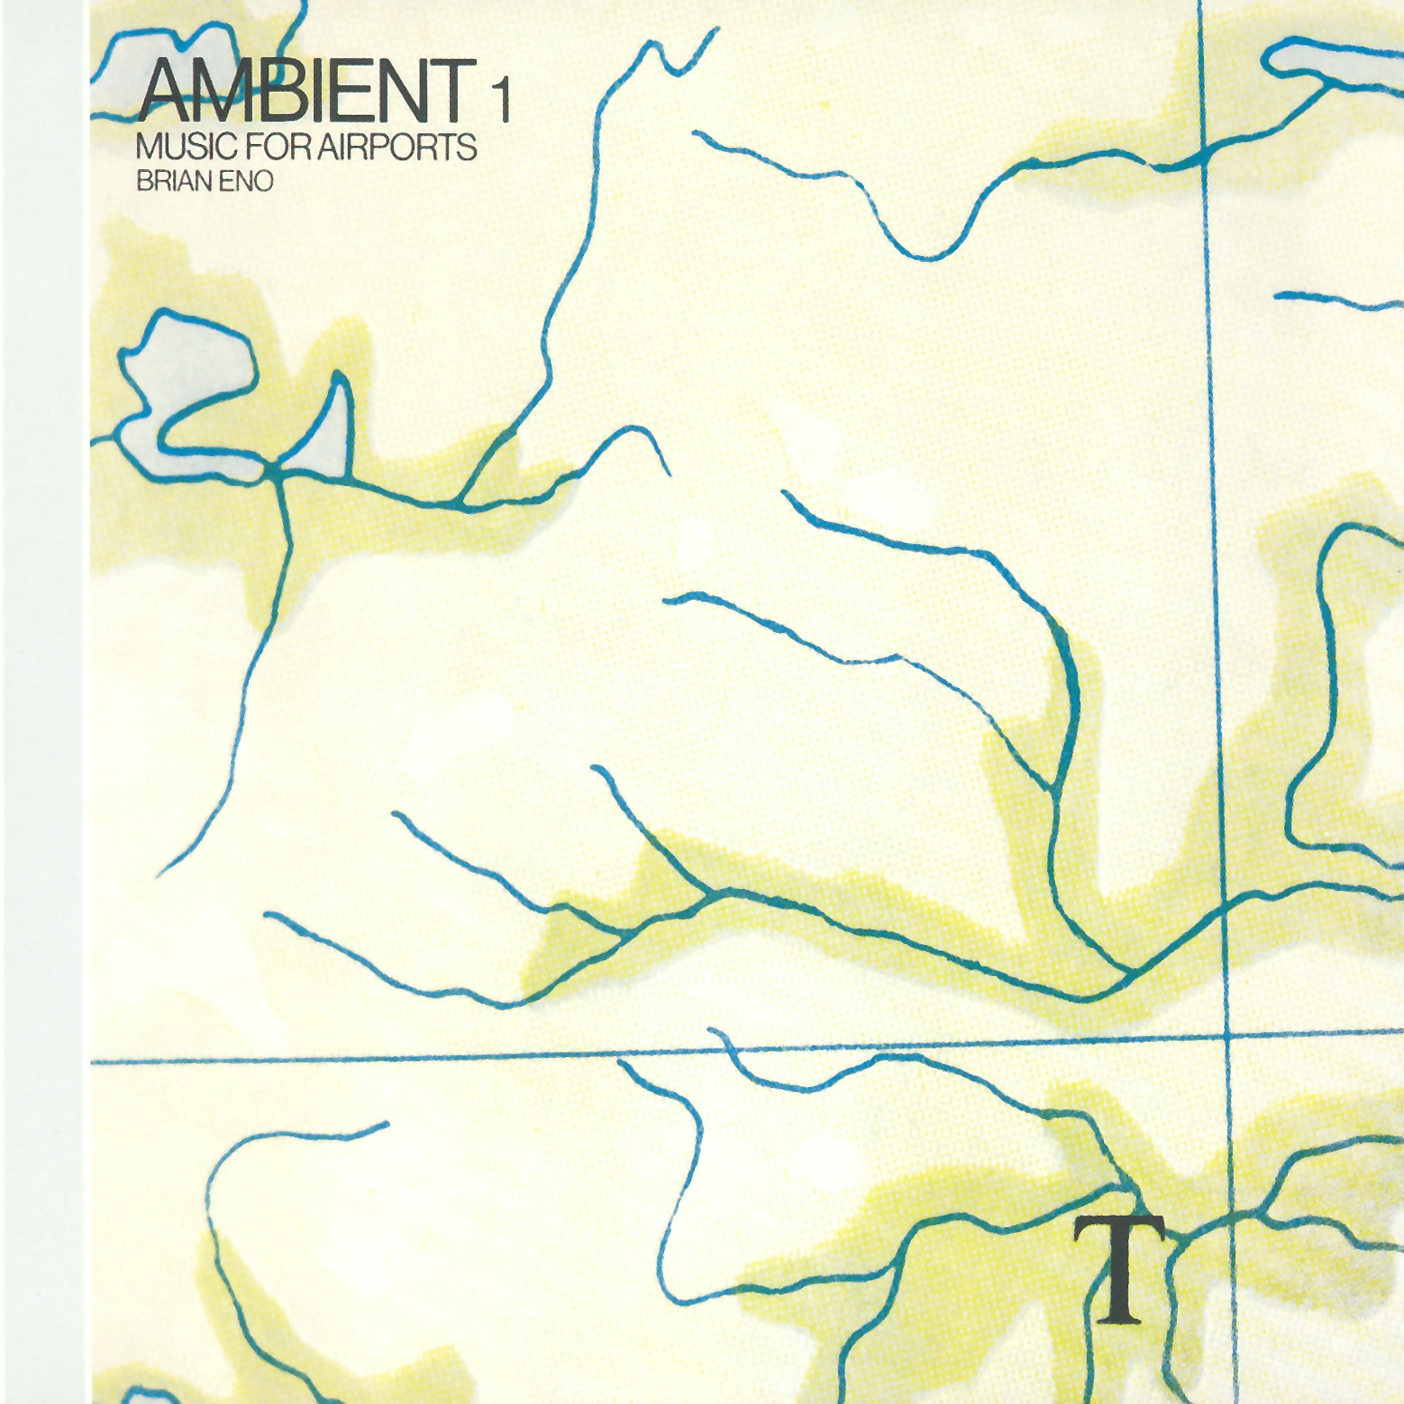 Album artwork for Ambient 1 - Music For Airports by Brian Eno